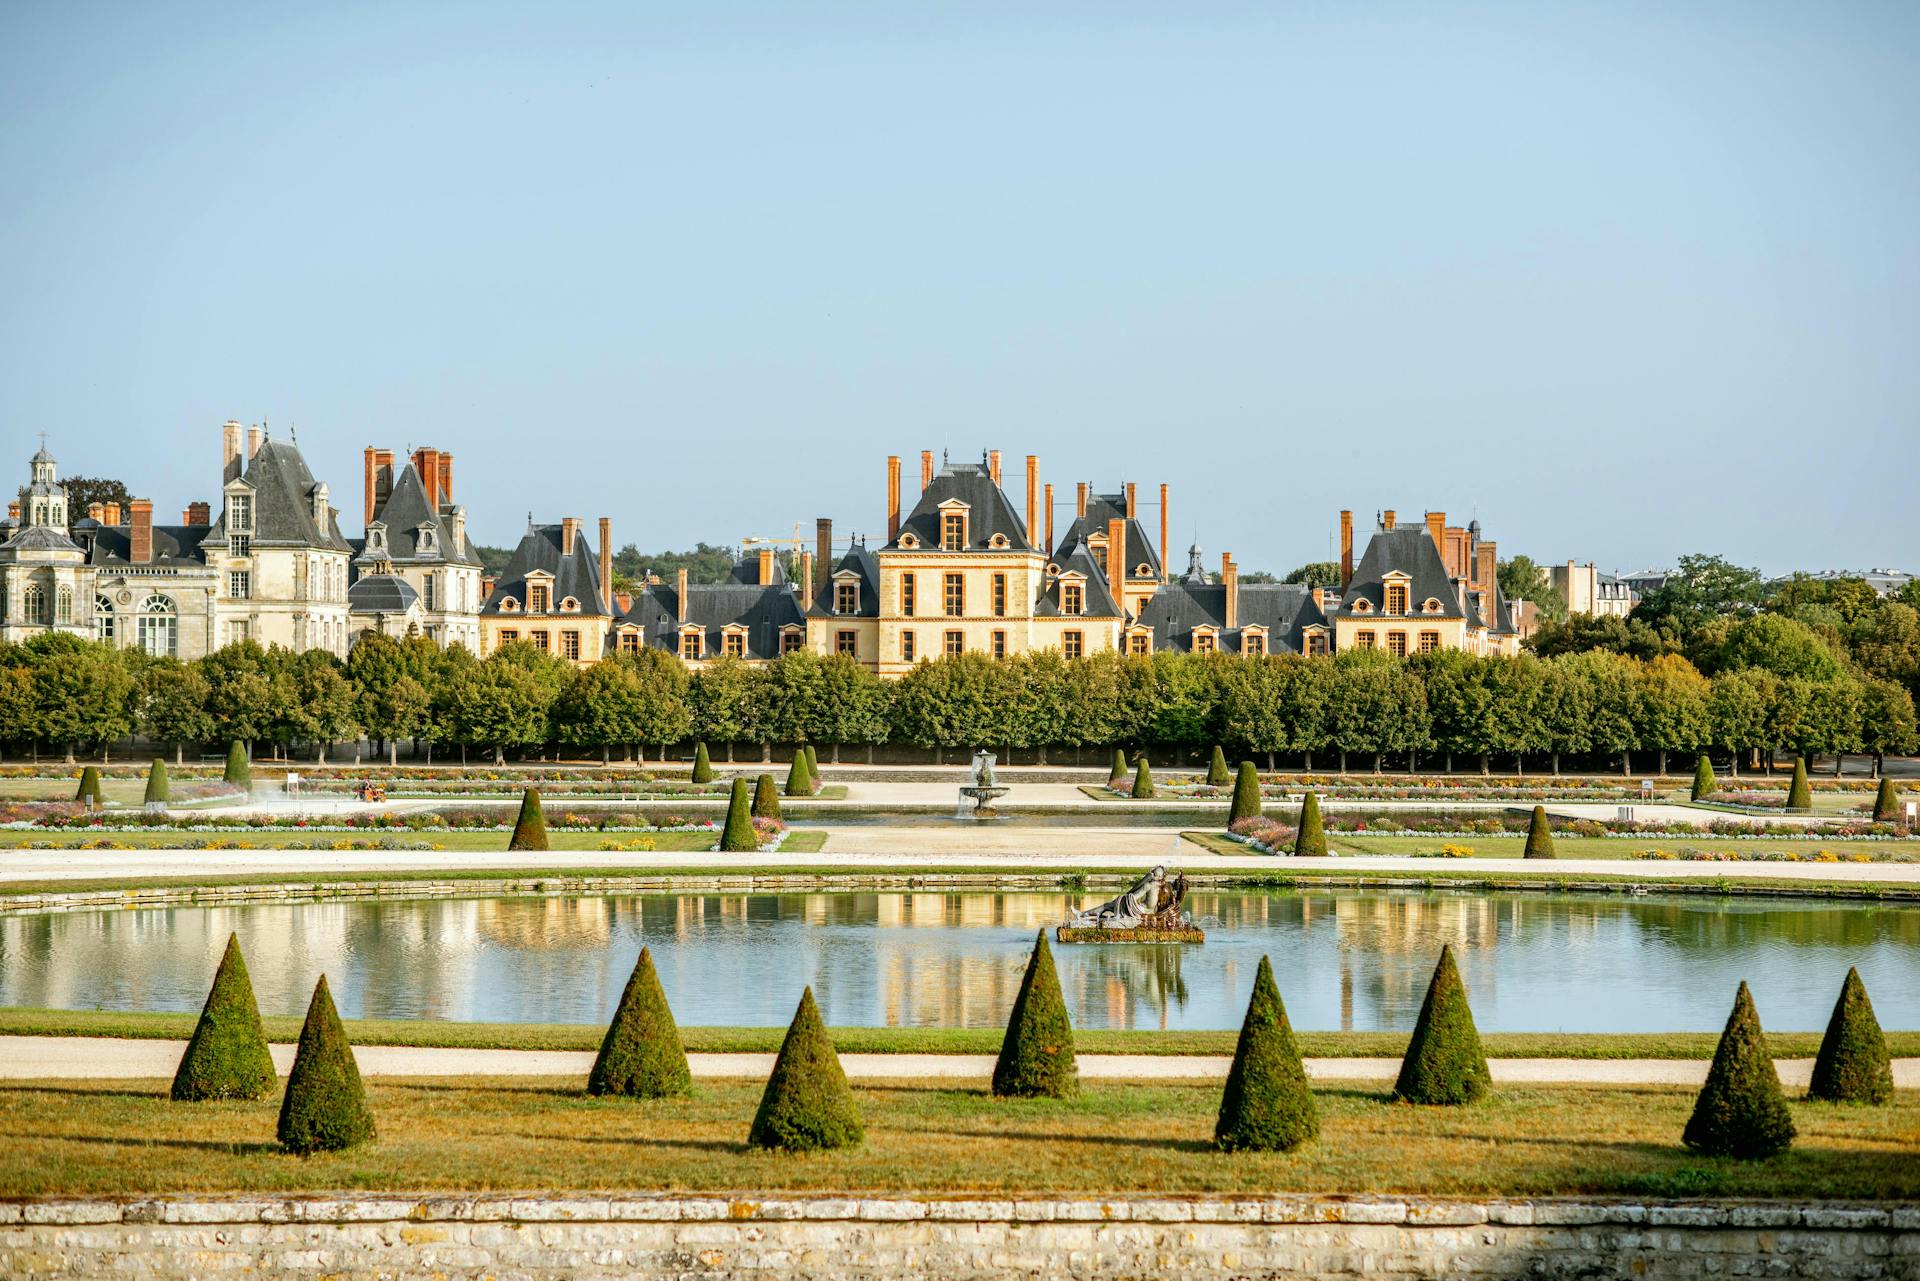 The Palace of Fontainebleau and the garden in front. 